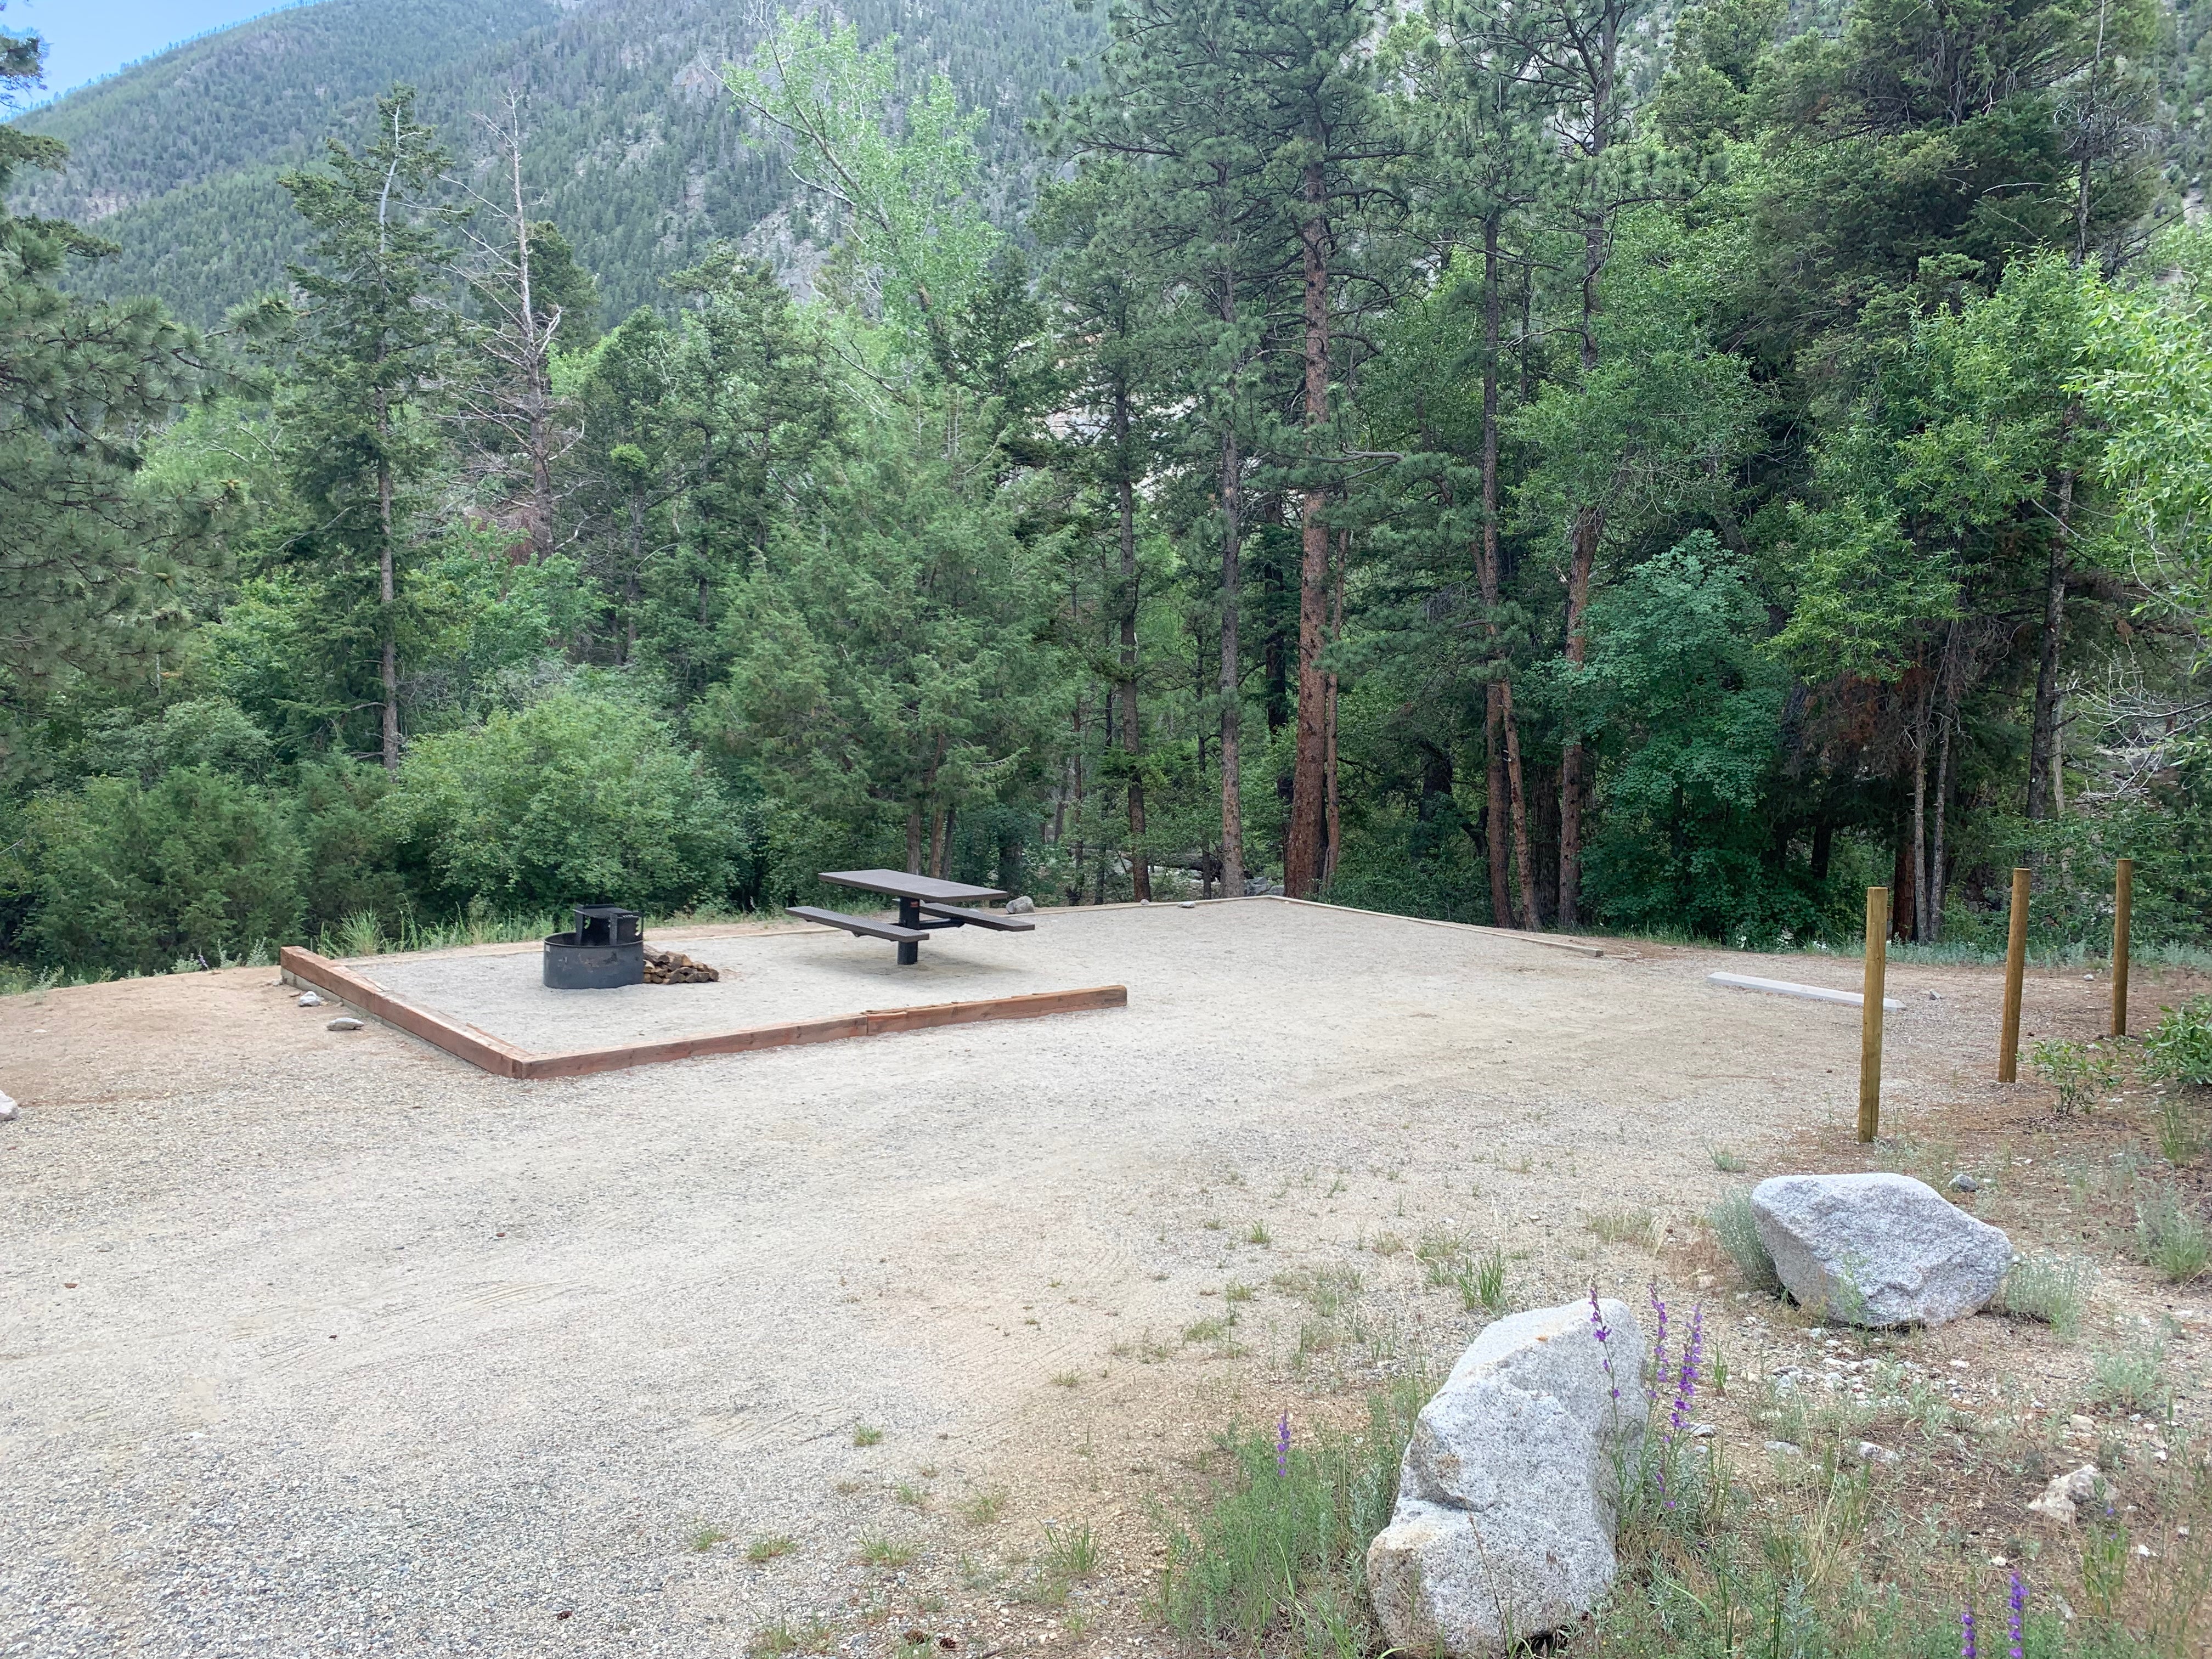 Camper submitted image from Mount Princeton - 4